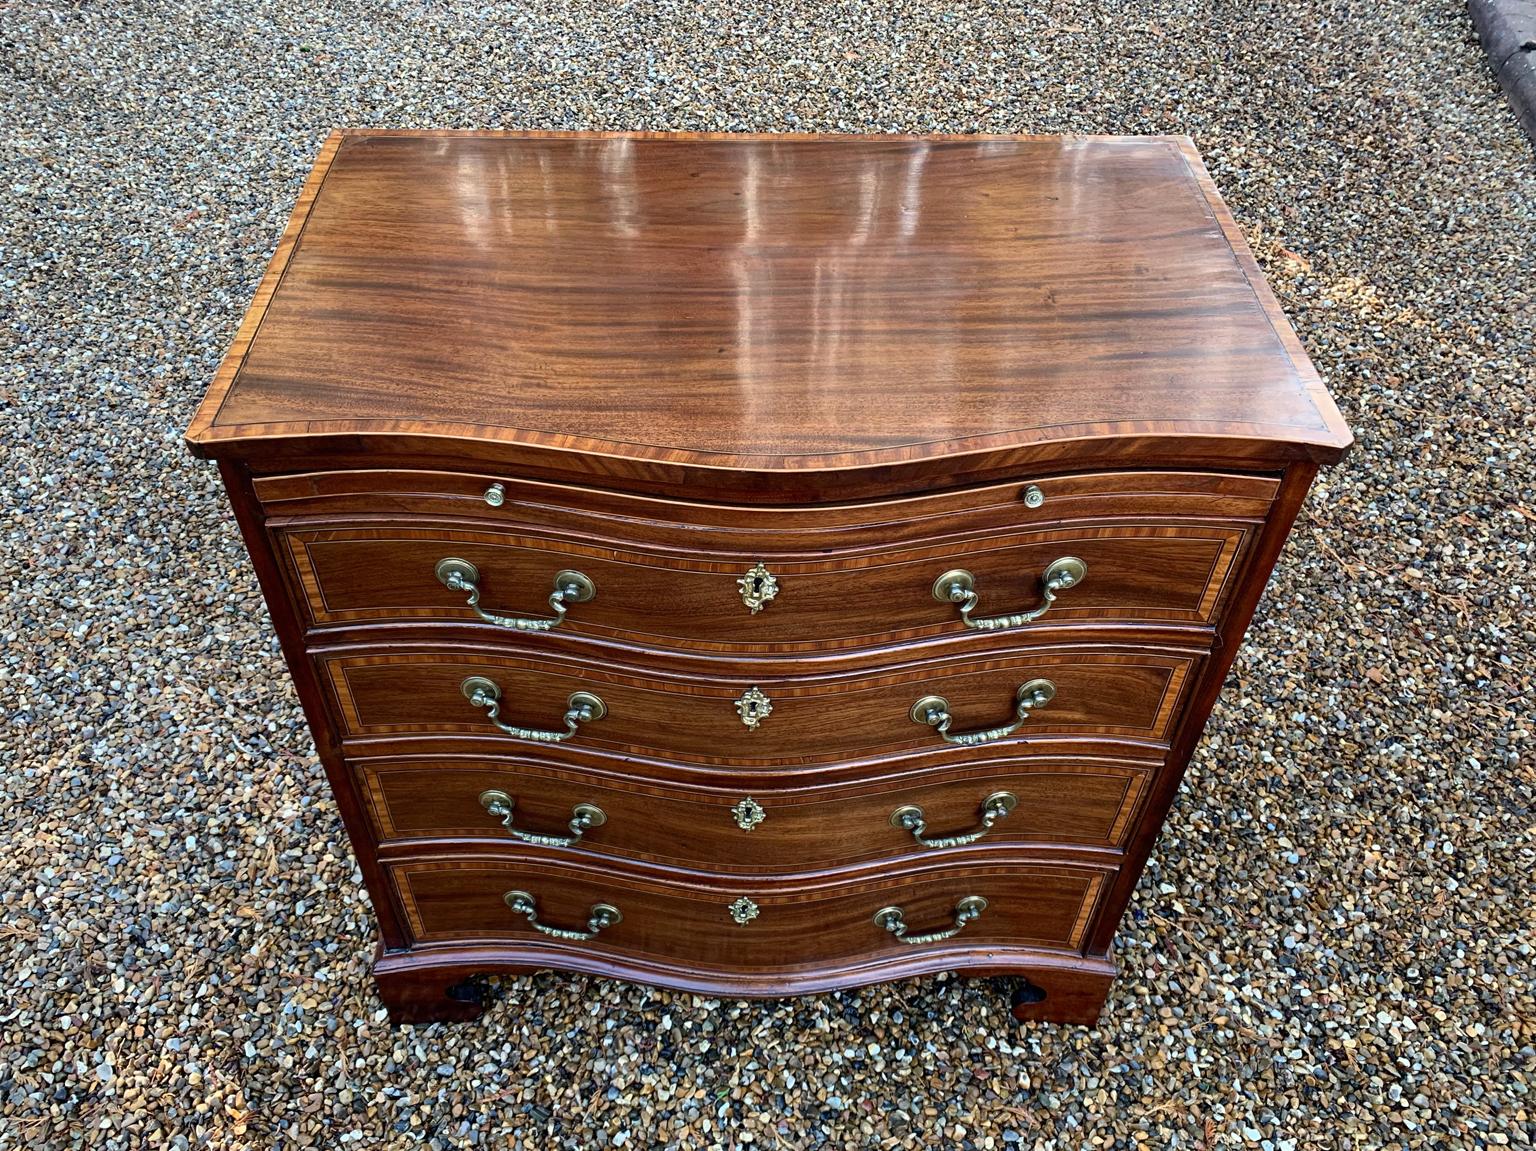 Georgian Mahogany Inlaid Serpentine Chest of Drawers In Excellent Condition For Sale In Richmond, London, Surrey